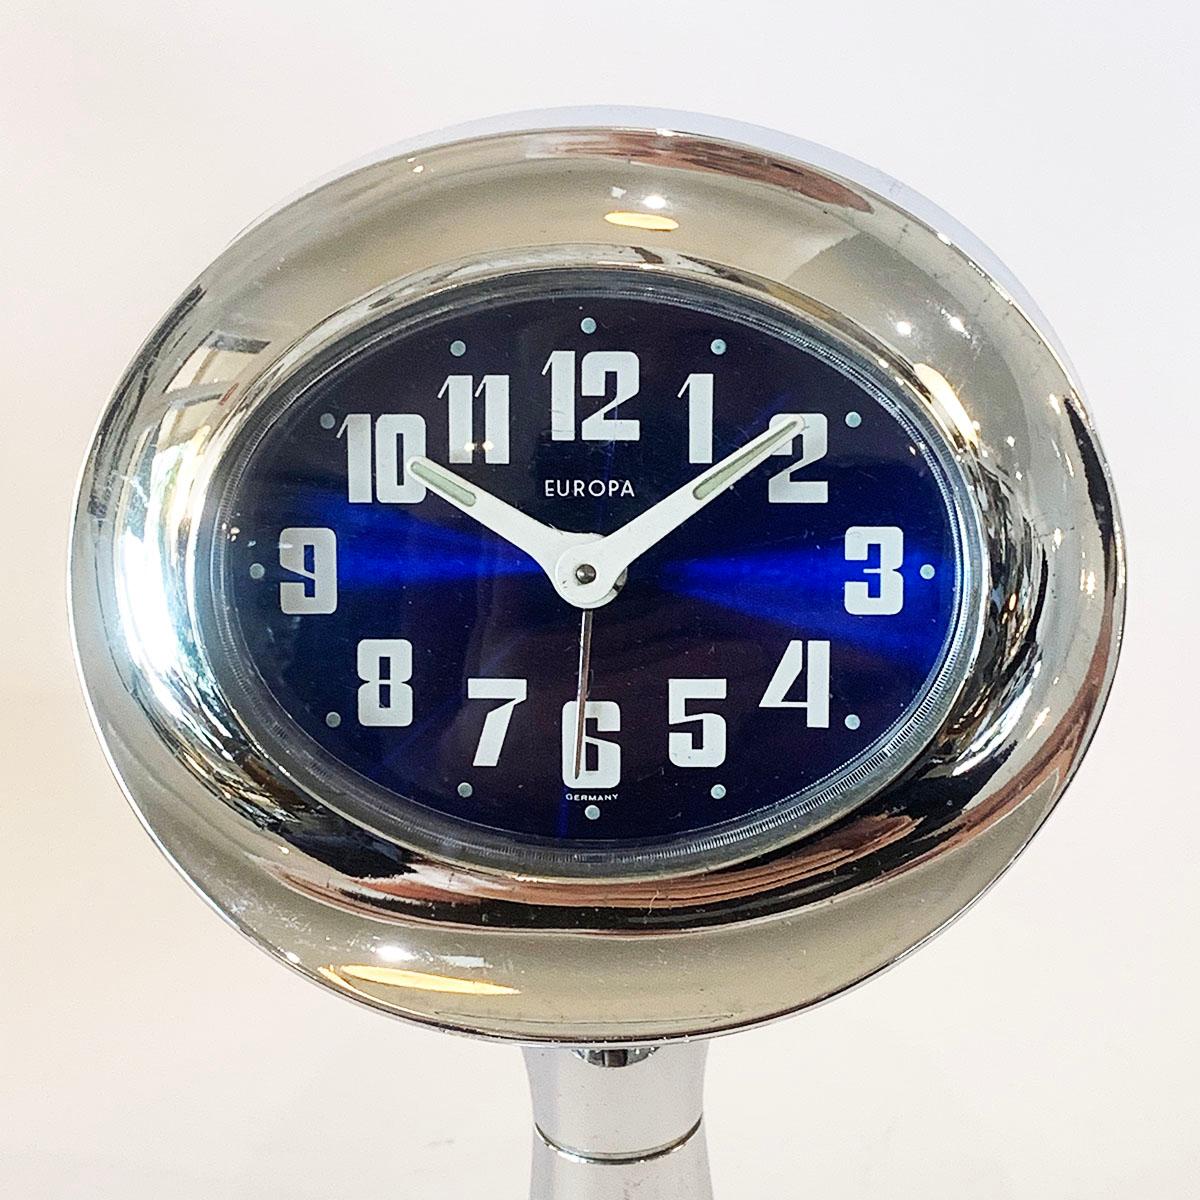 Midcentury futuristic clock by Europa the height of Design and so advanced, West Germany, circa 1950s. Chromed plastic and possibly solid blue Lucite body with extensive controls and Alarm to the rear. Face is perfect with illuminous dots every 5